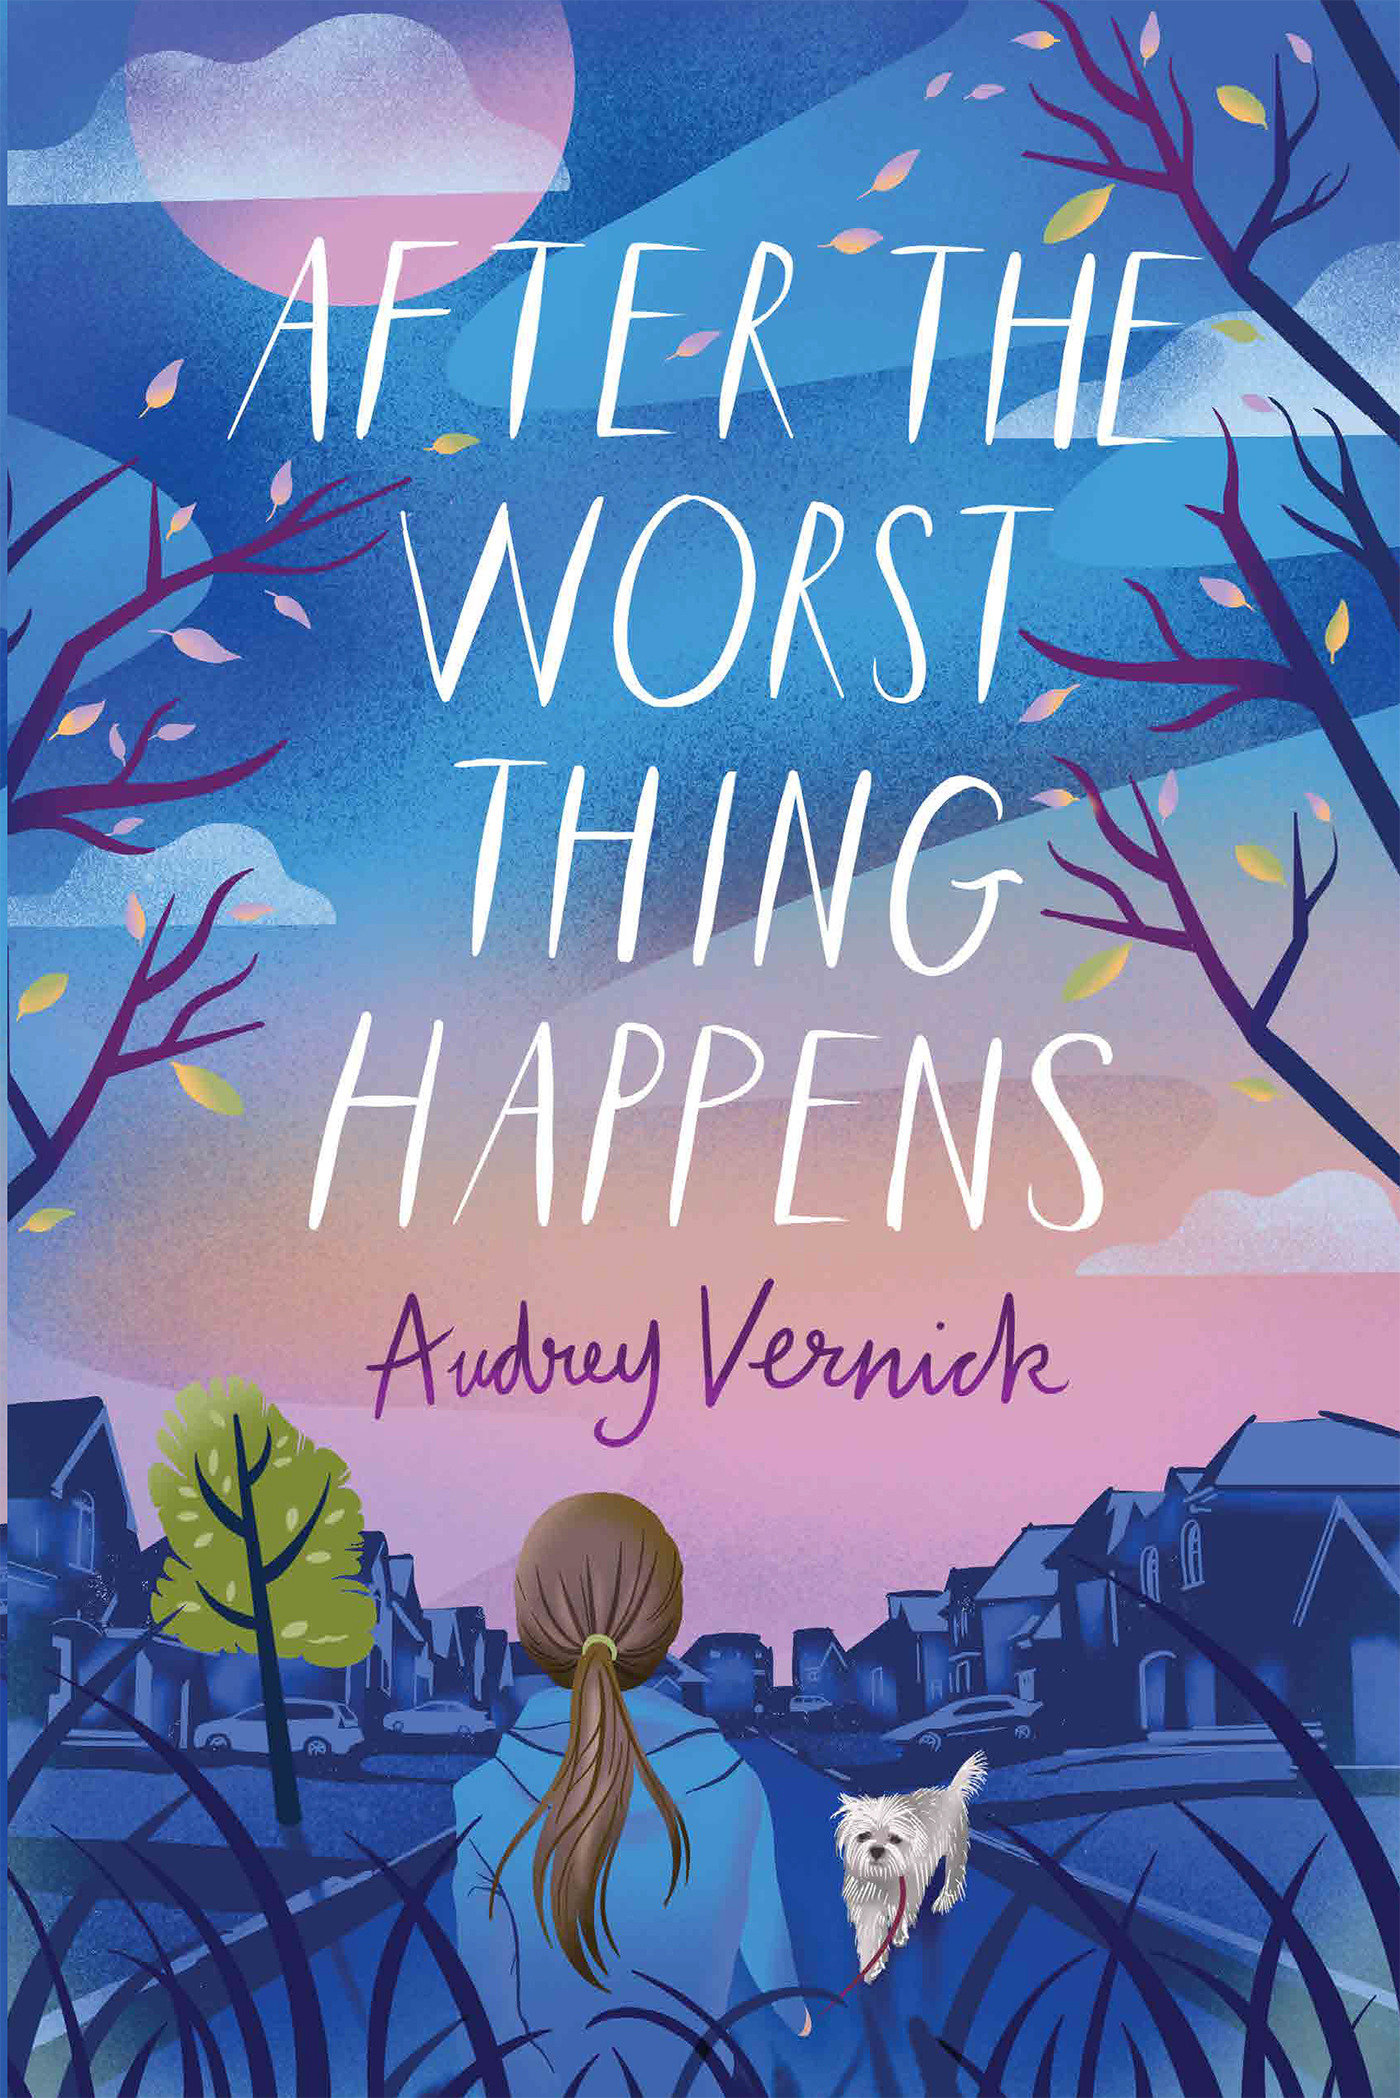 After The Worst Thing Happens (Hardcover Book)